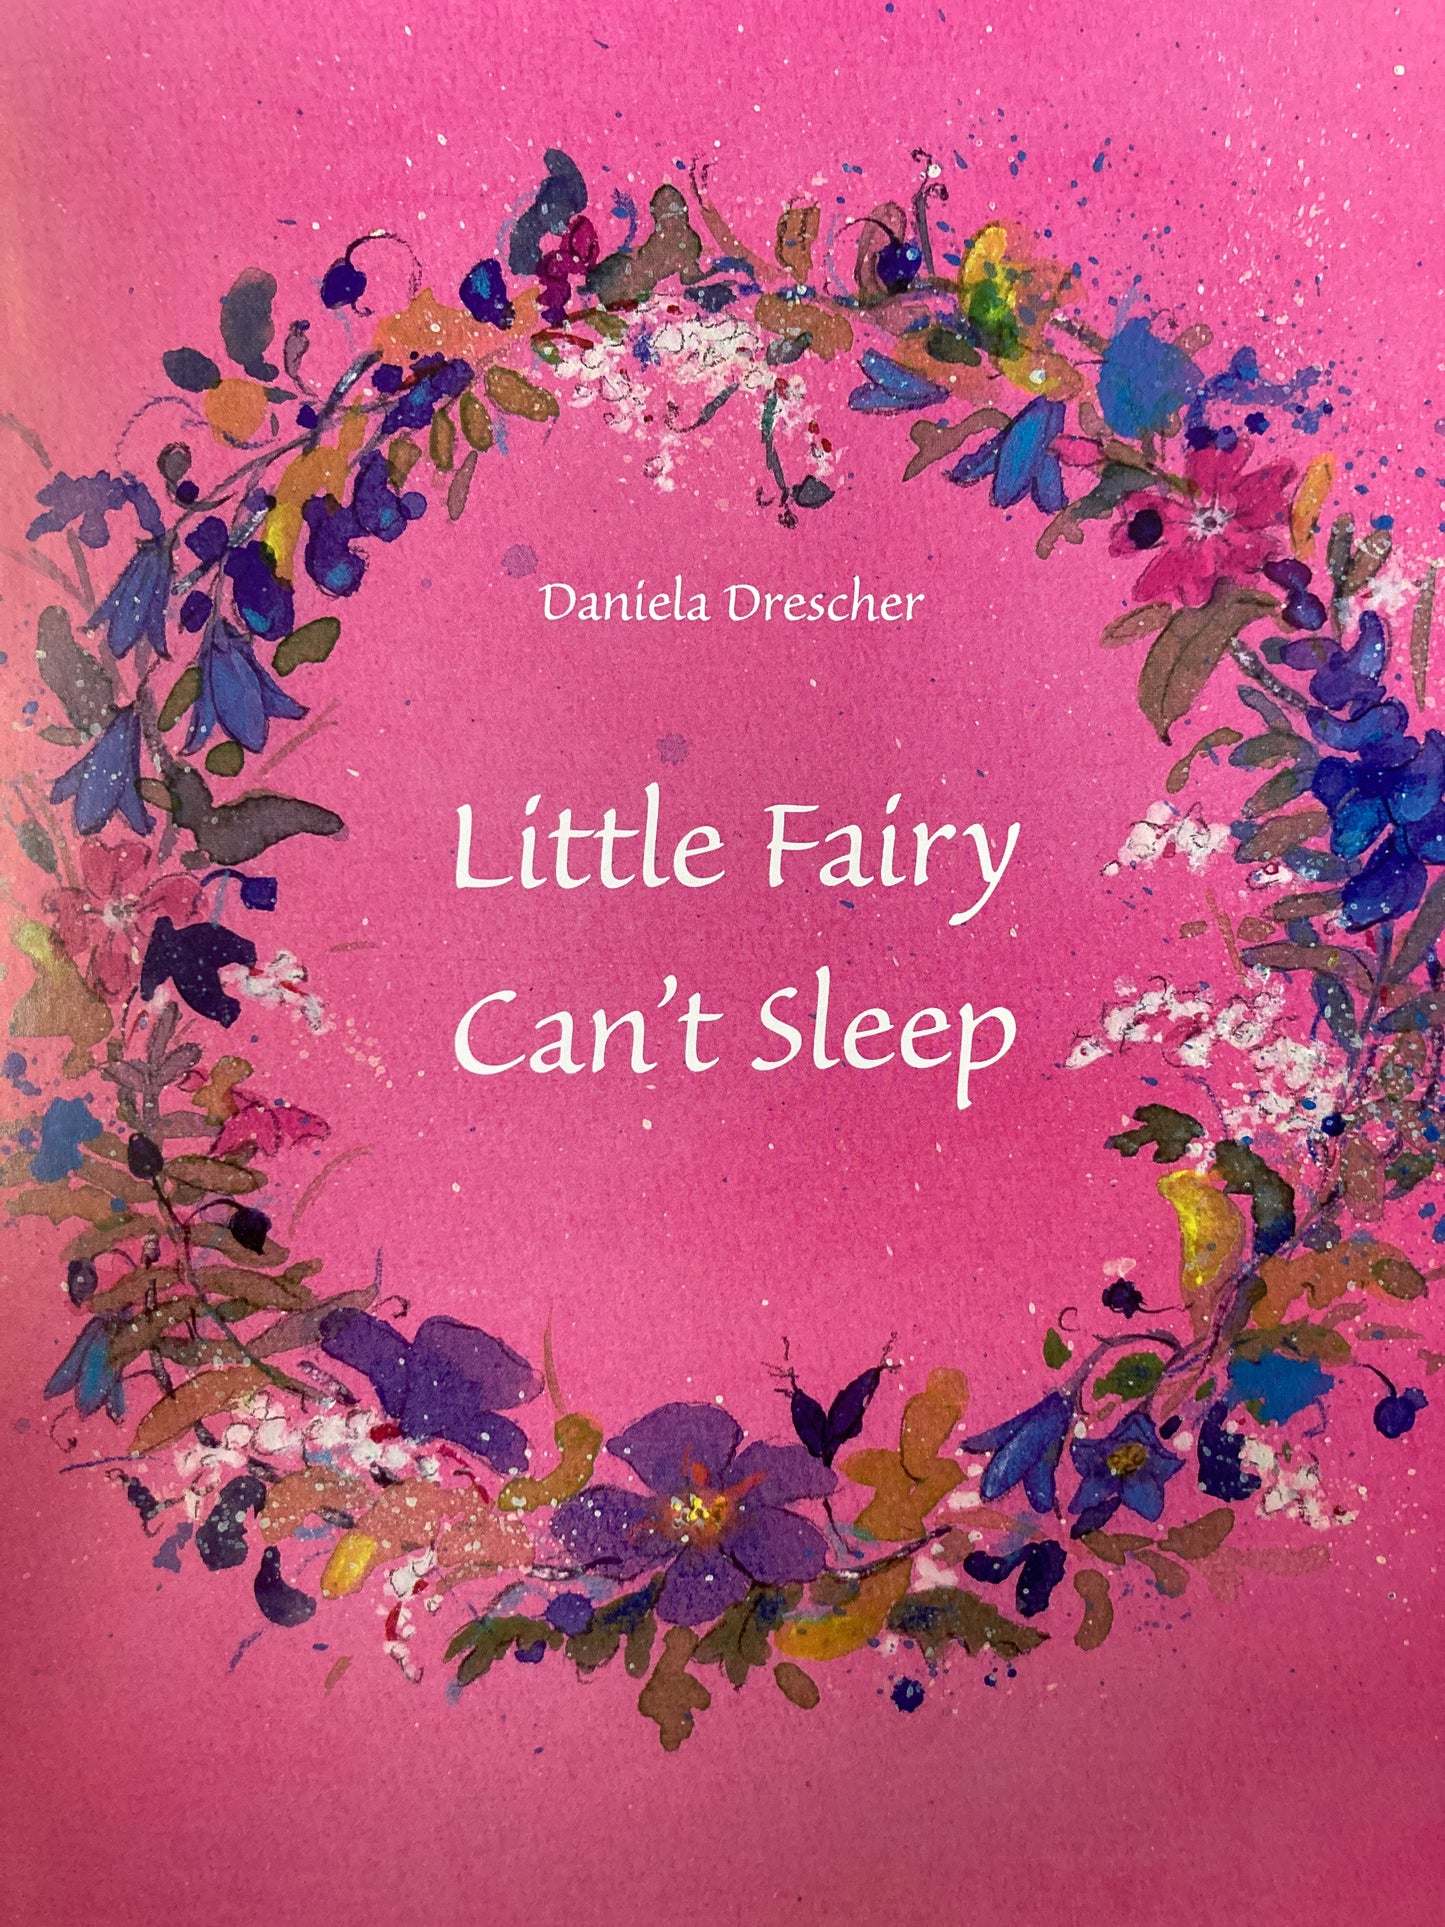 Children’s Picture Book - LITTLE FAIRY CAN’T SLEEP